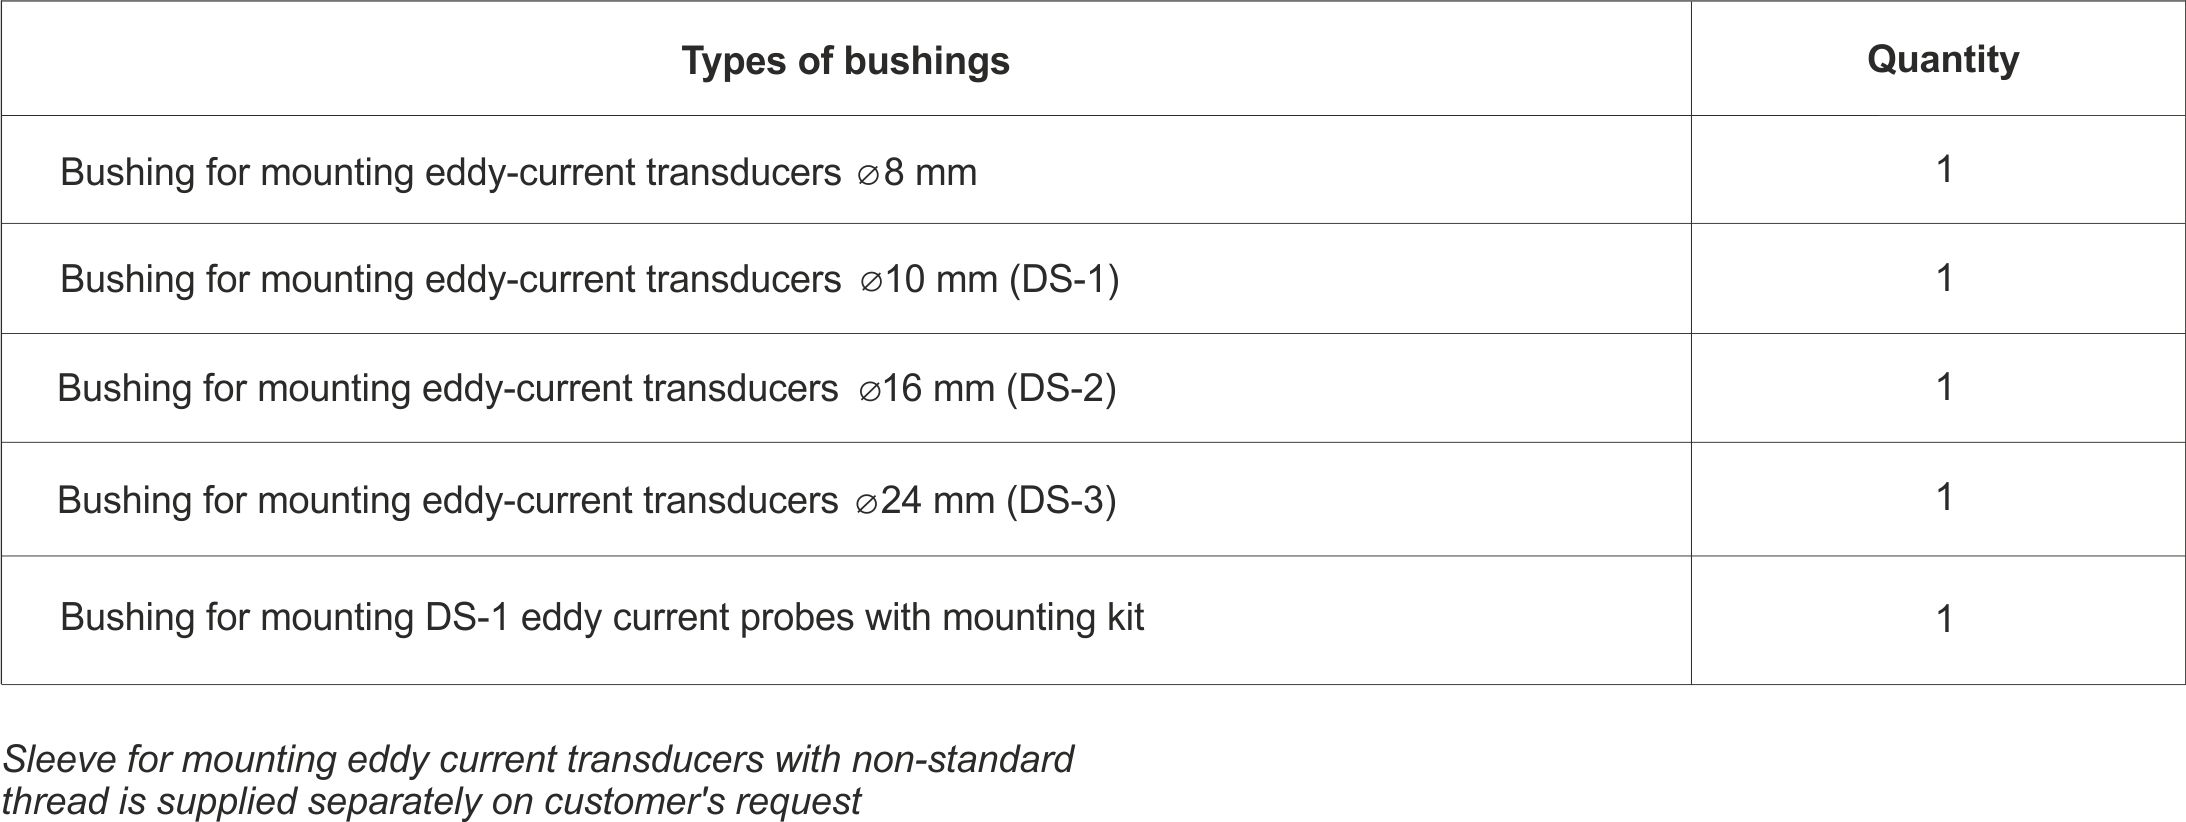 Varieties of replaceable bushings for installation of eddy current transducers